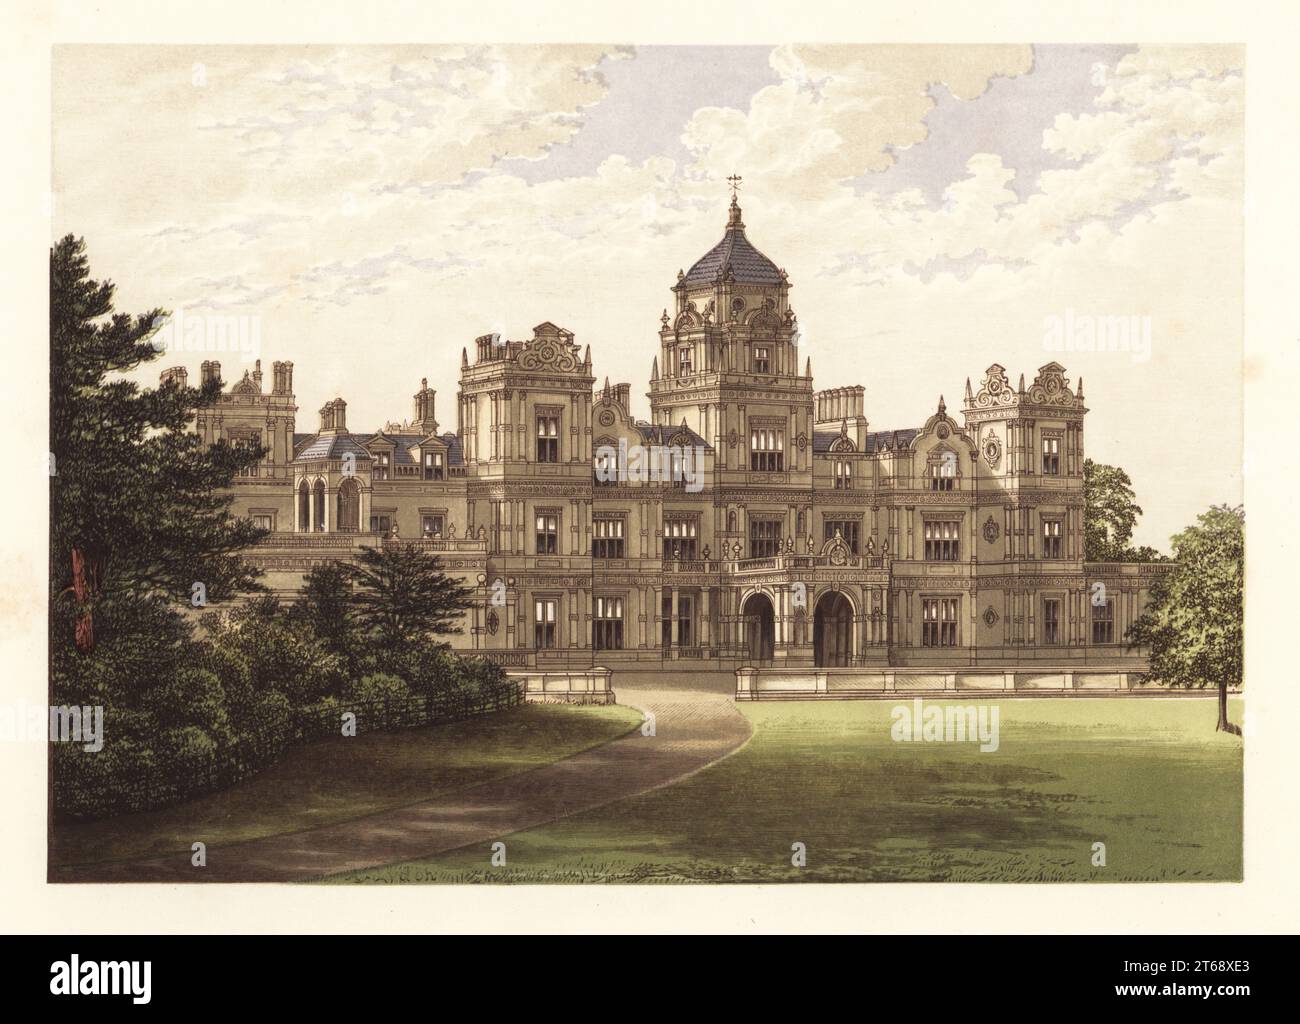 Westonbirt House, Gloucestershire, England. Mansion house designed by architect Lewis Vulliamy for owner Robert Stayner Holford in 1839. Colour woodblock by Benjamin Fawcett in the Baxter process of an illustration by Alexander Francis Lydon from Reverend Francis Orpen Morriss Picturesque Views of the Seats of Noblemen and Gentlemen of Great Britain and Ireland, William Mackenzie, London, 1880. Stock Photo